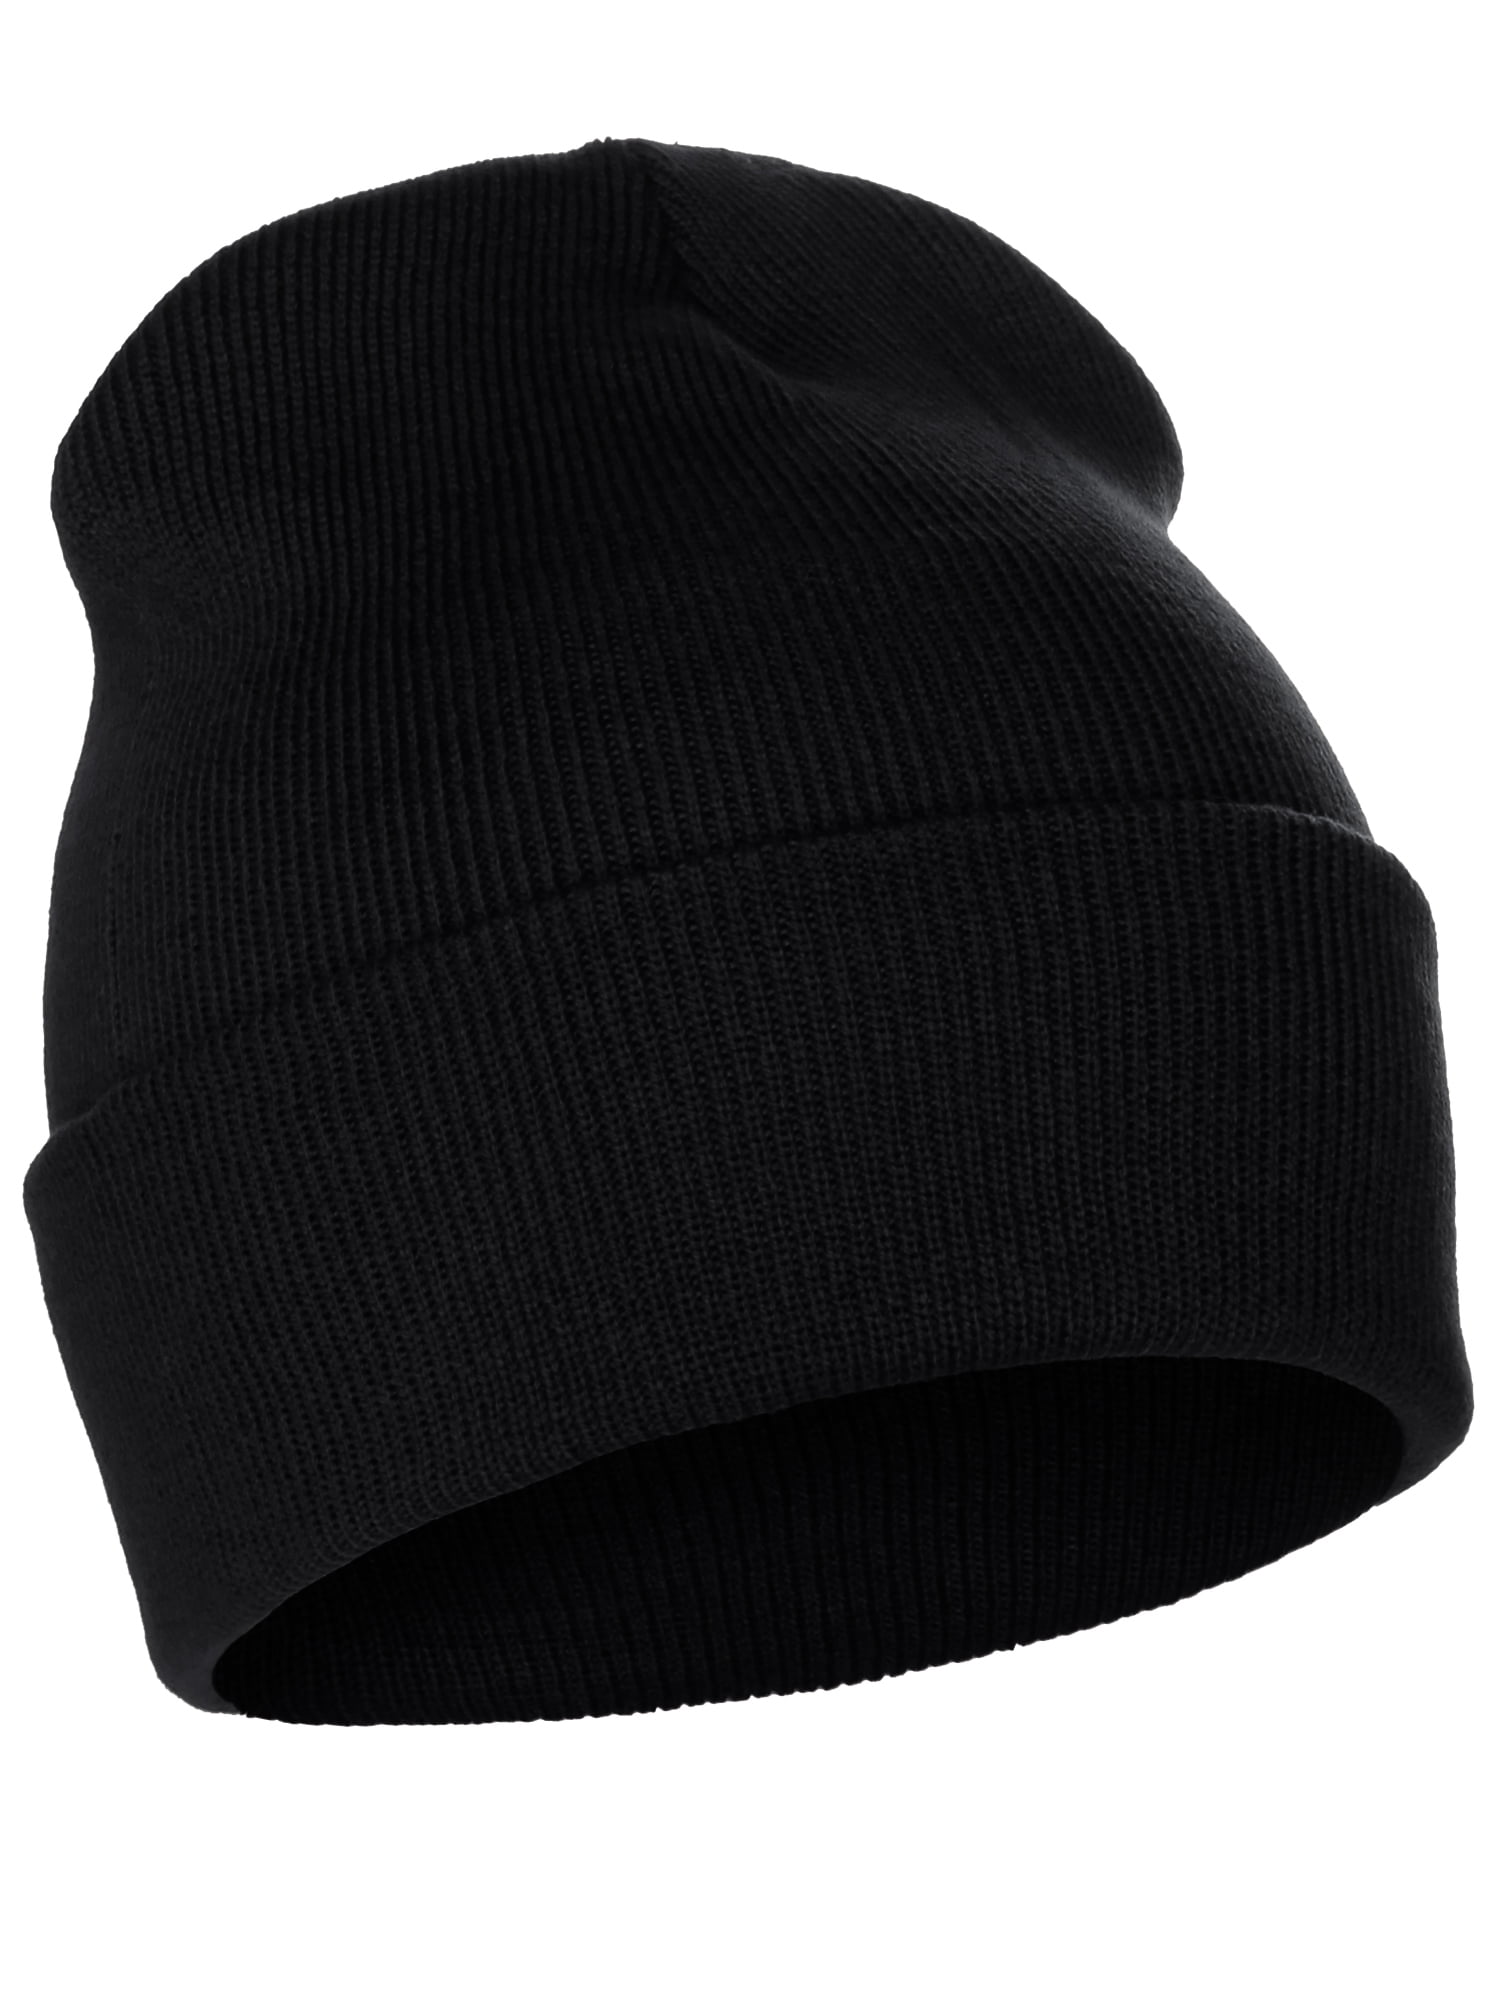 Unisex Beanie Cap Soft Daily Beanies Skully Caps Dawg Pound Trendy Cuffed Skull Knit Hat Online